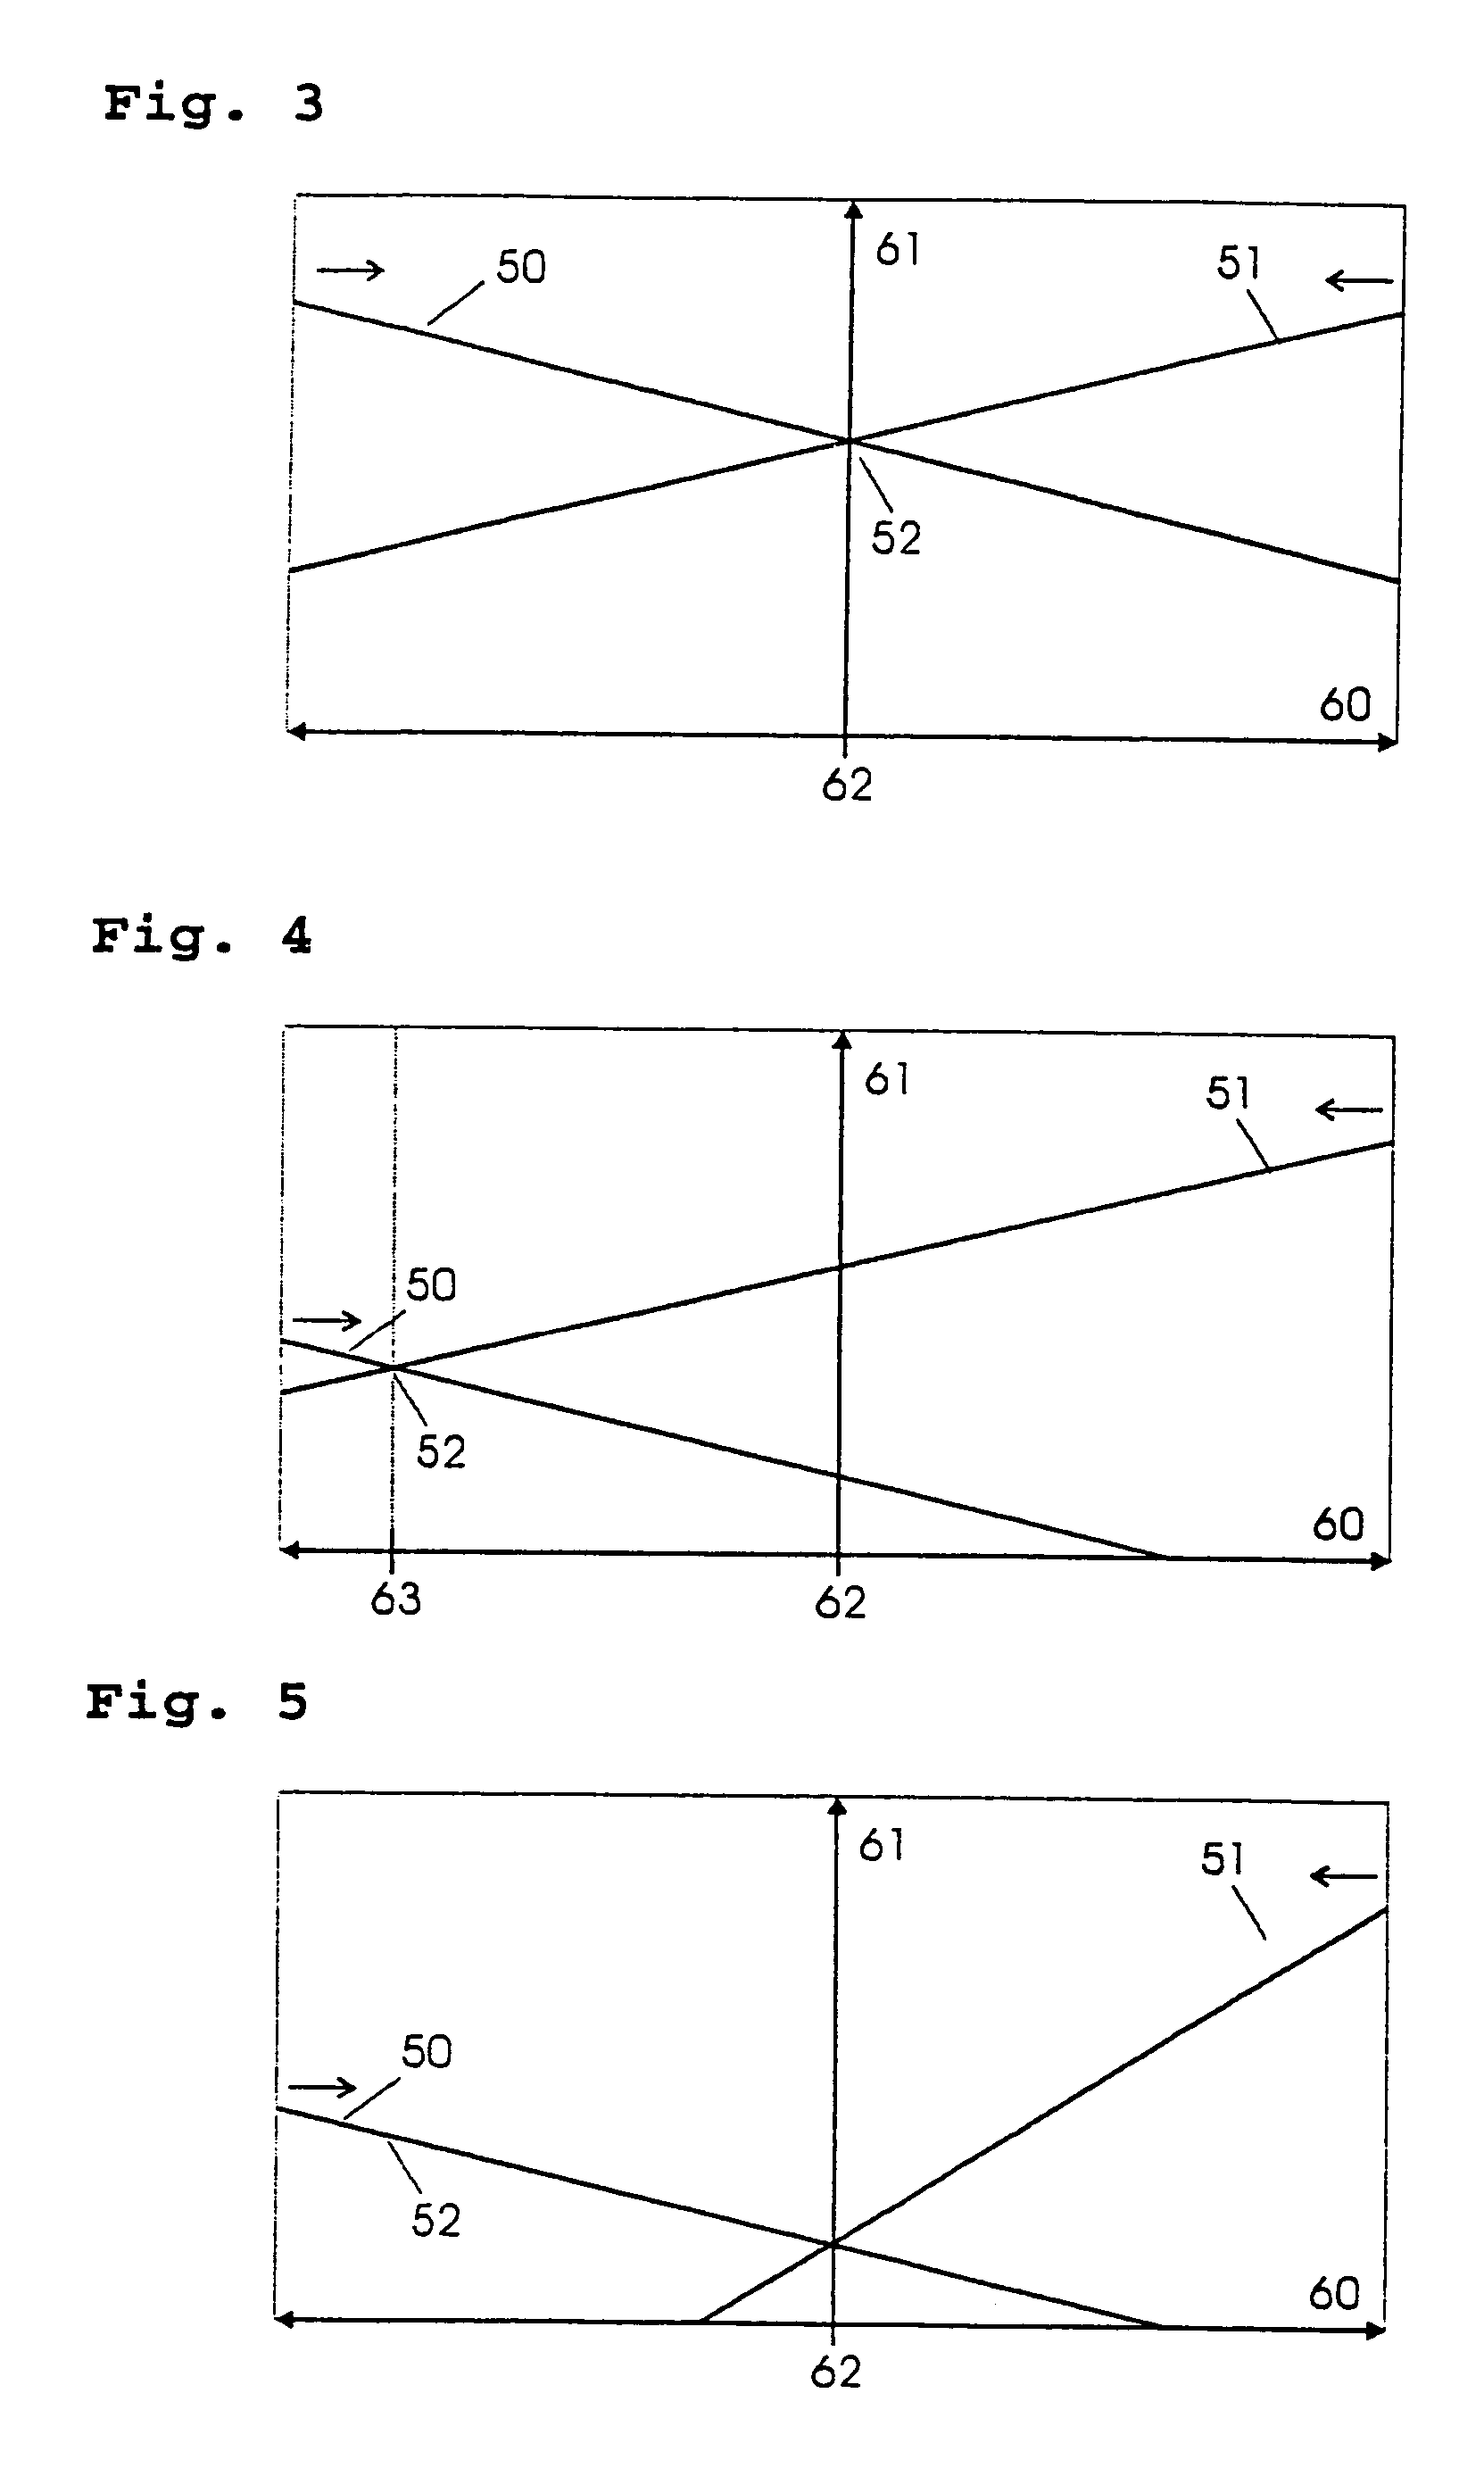 Optical rotary data transmission device with active termination